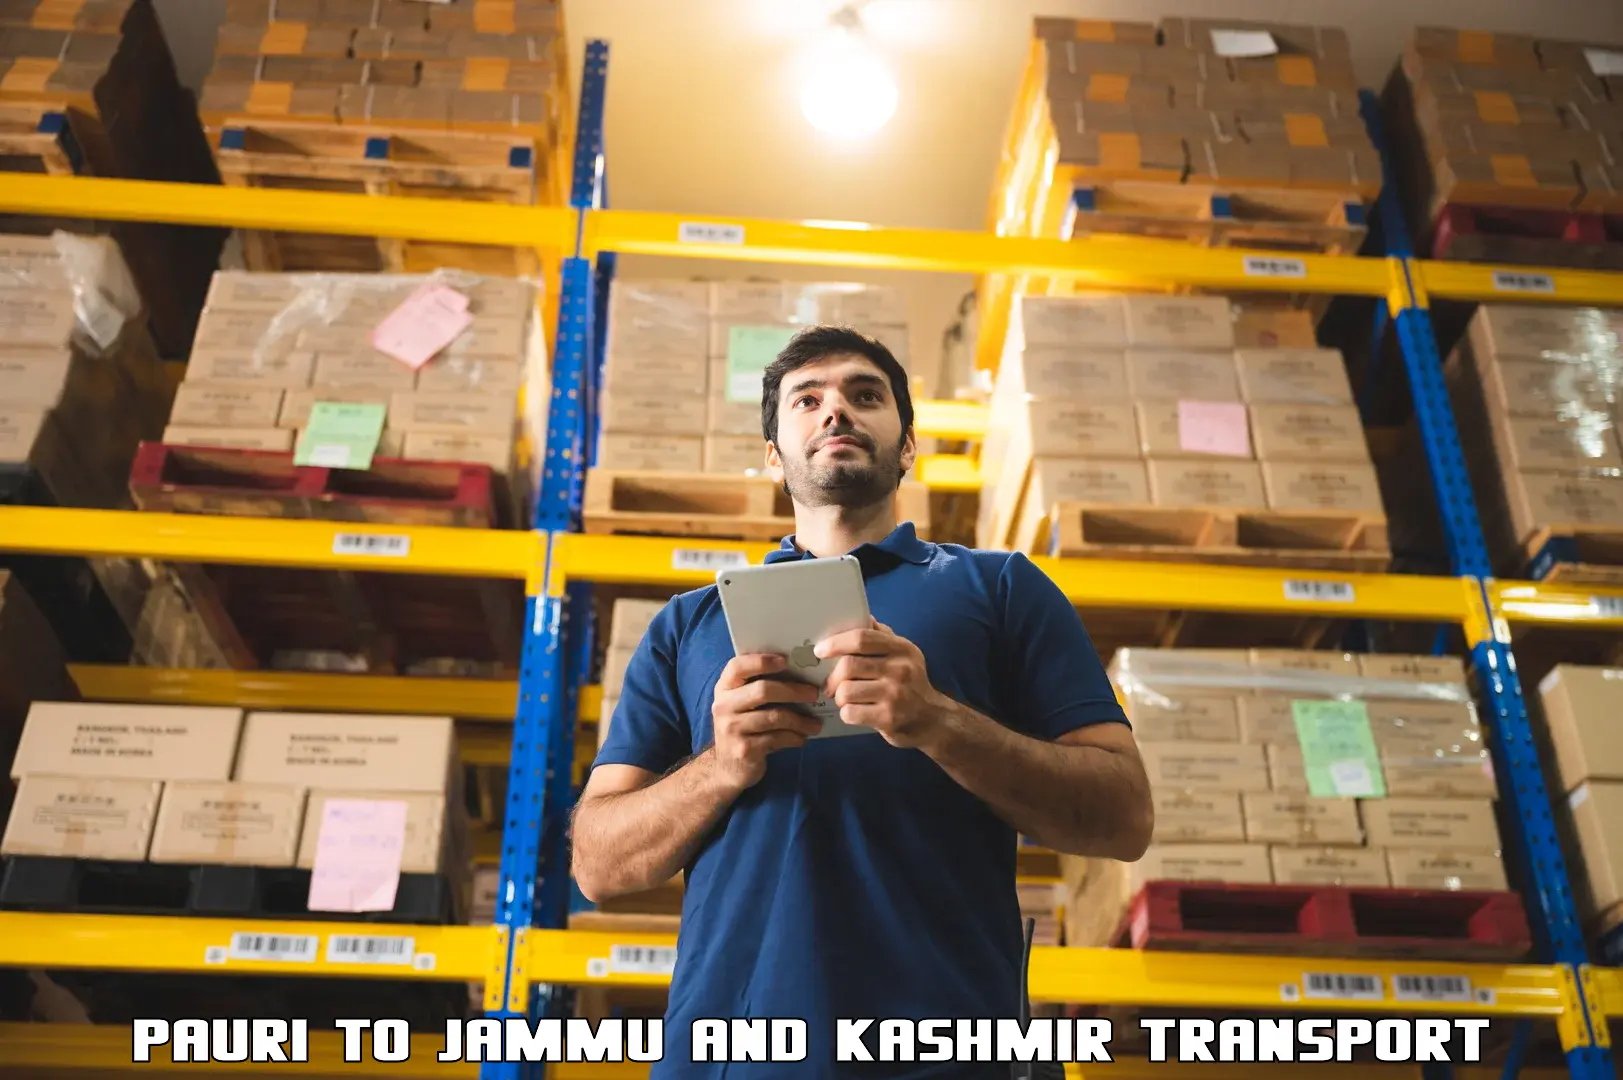 Daily parcel service transport Pauri to Jammu and Kashmir